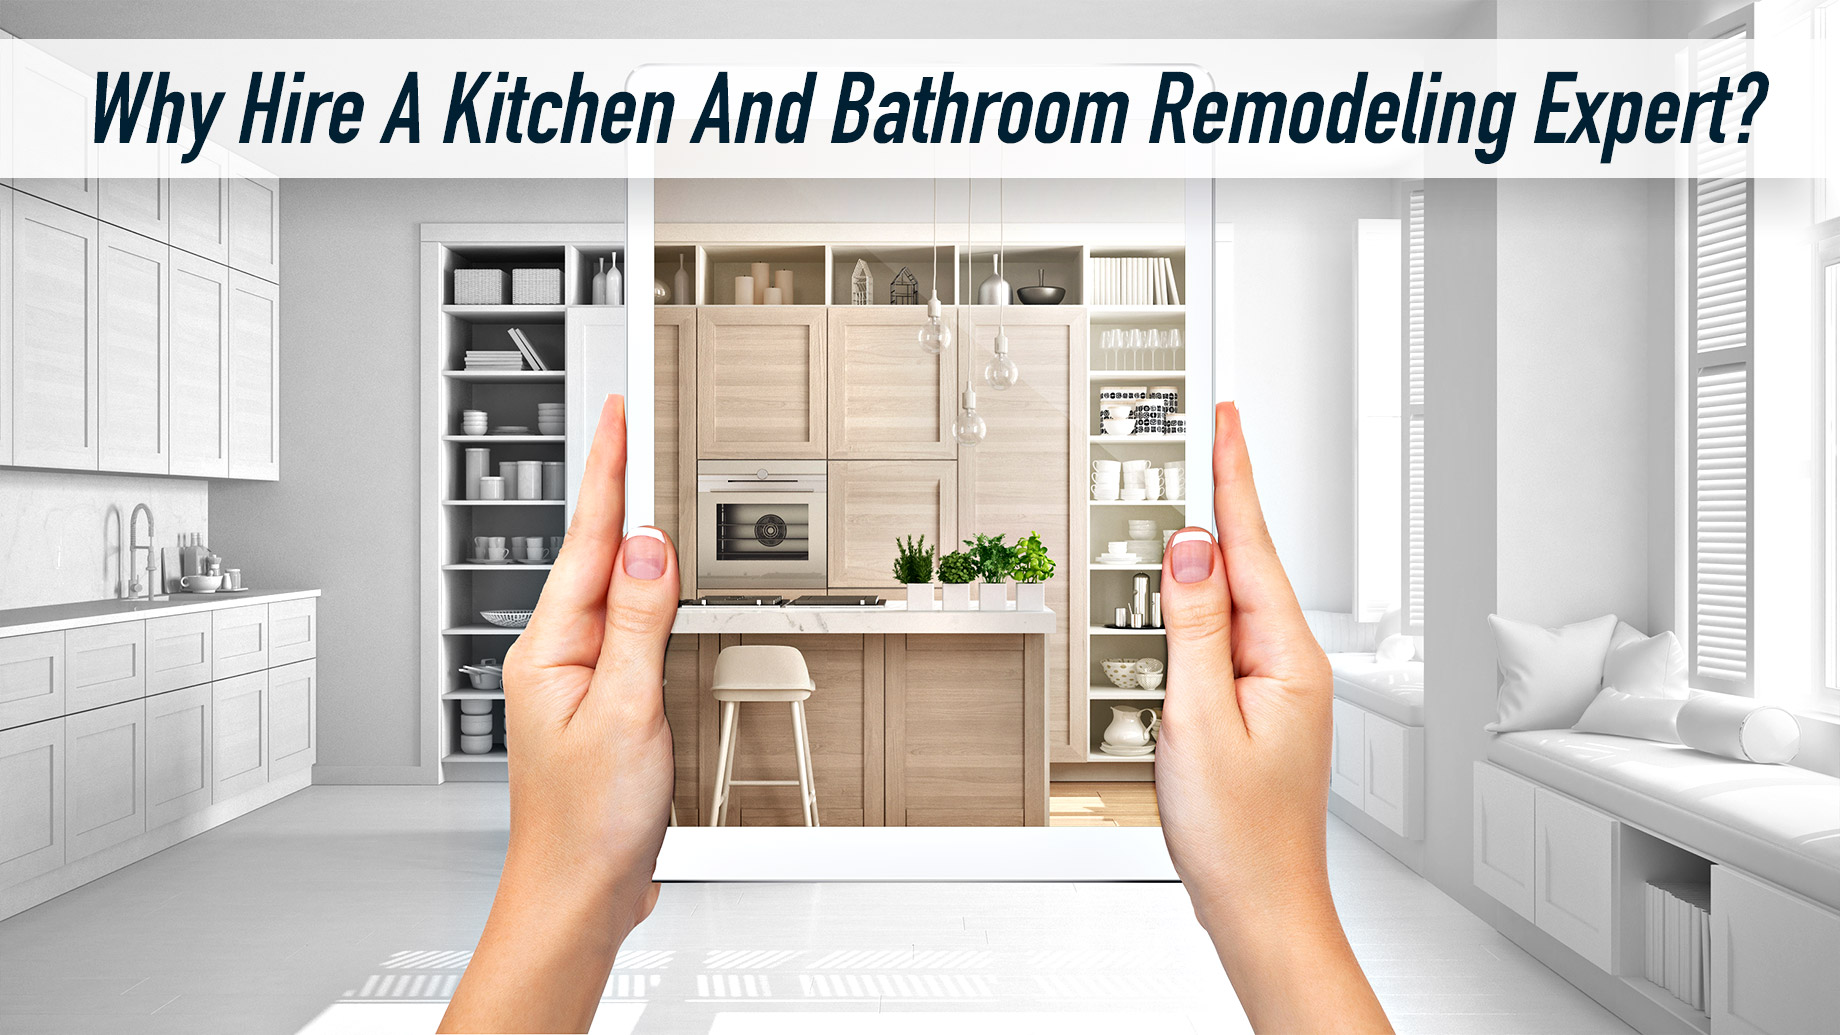 Why Hire A Kitchen And Bathroom Remodeling Expert?Why Hire A Kitchen And Bathroom Remodeling Expert?